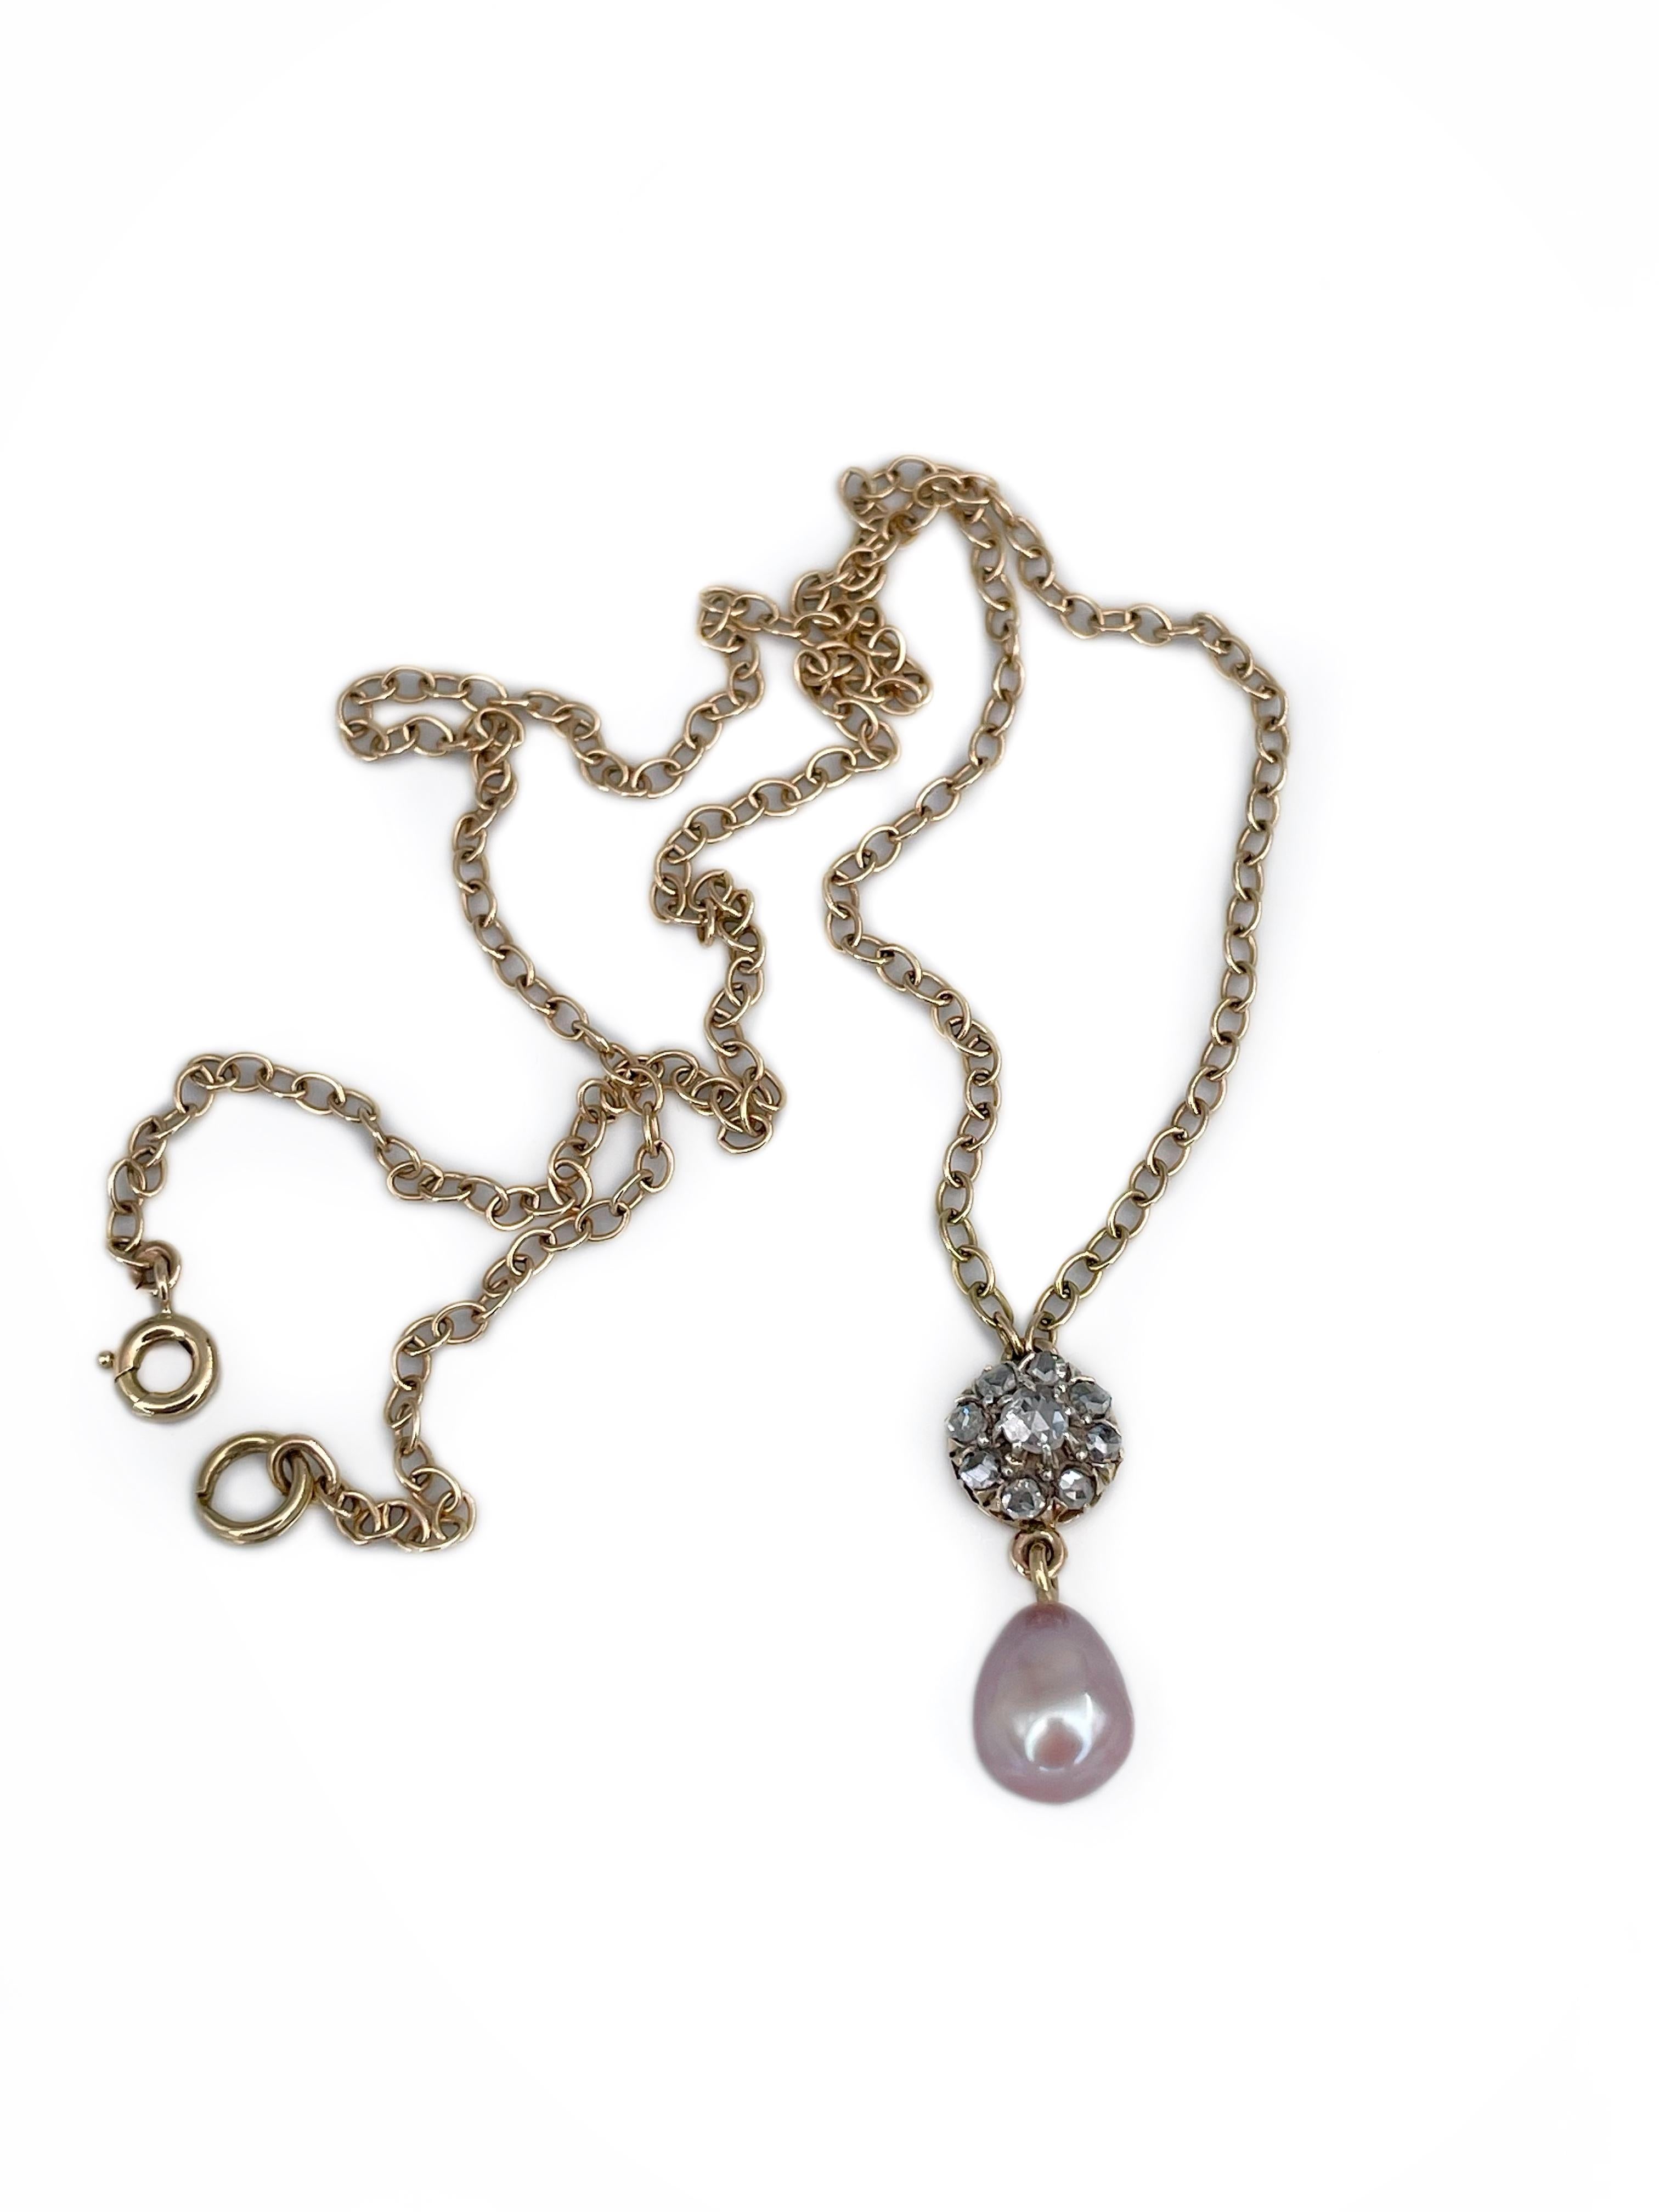 This is an Edwardian pendant necklace with a chain crafted in 18K yellow gold. Circa 1910. 

The piece features:
- 1 creamy cultured pearl
- 9 rose cut diamonds

Weight: 6.00g
Pendant length: 2.2cm
Chain length: 46.5cm 

———

If you have any